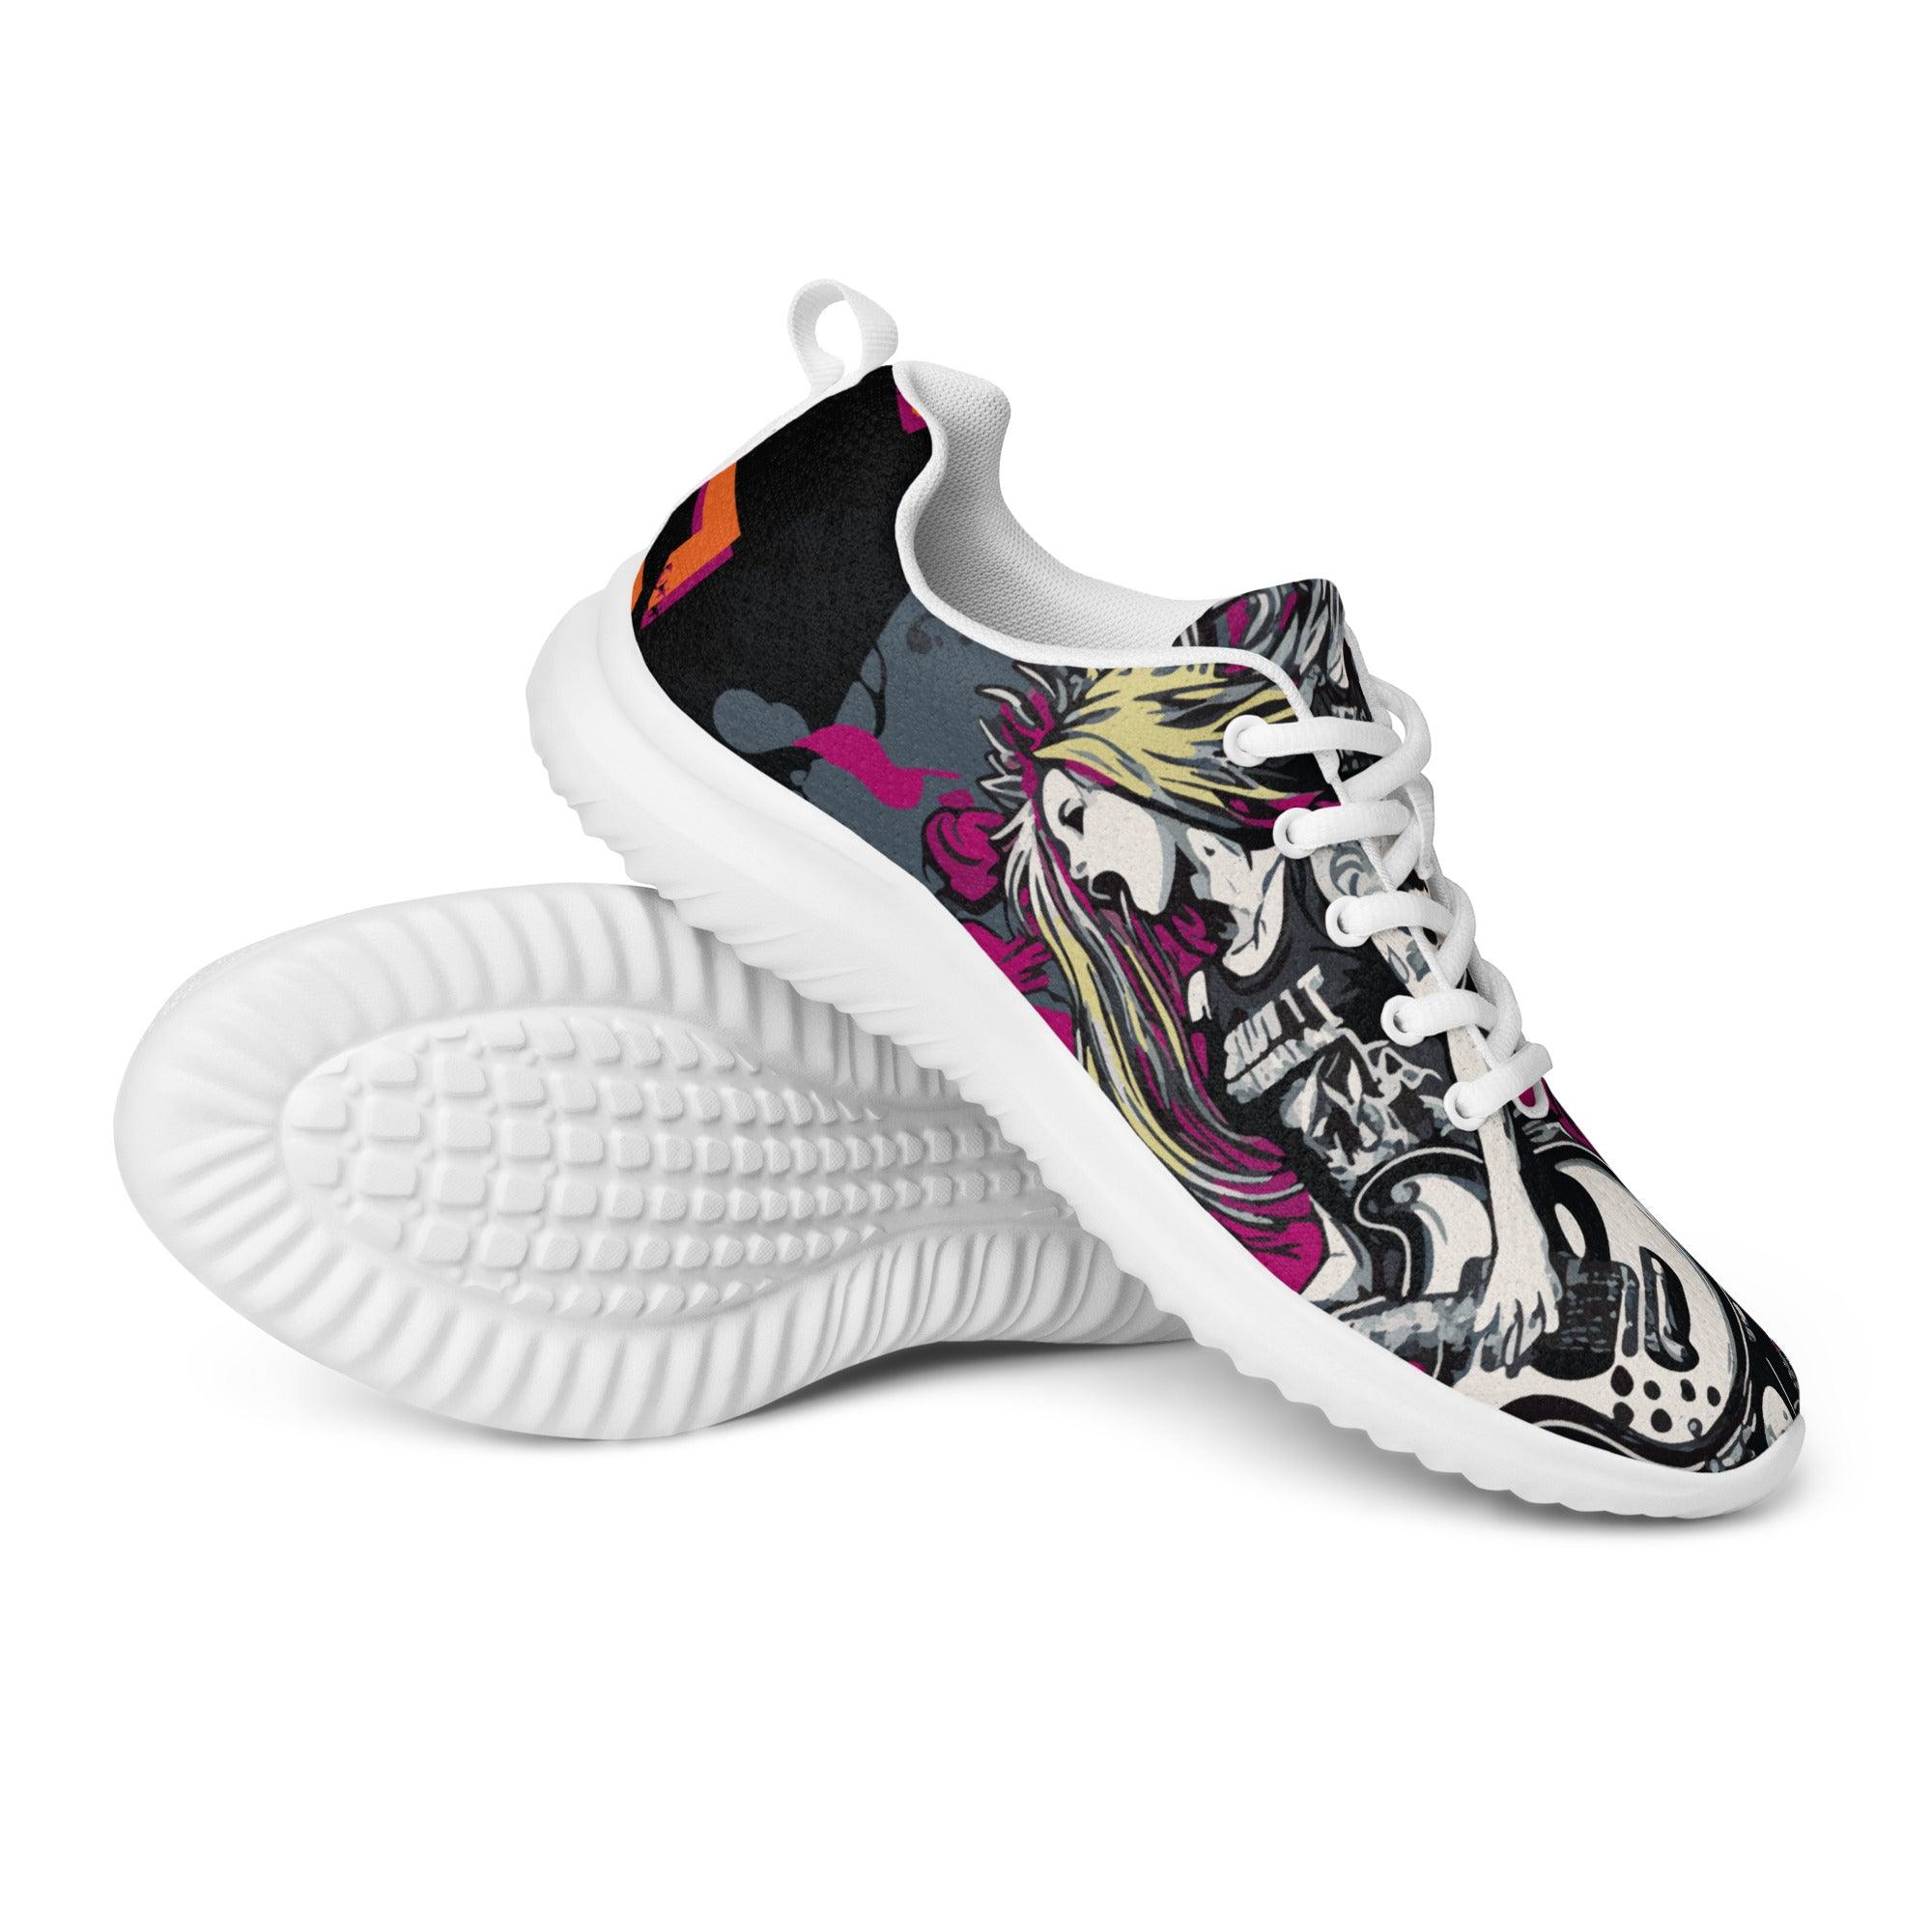 Play it loud women’s athletic shoes - Beyond T-shirts